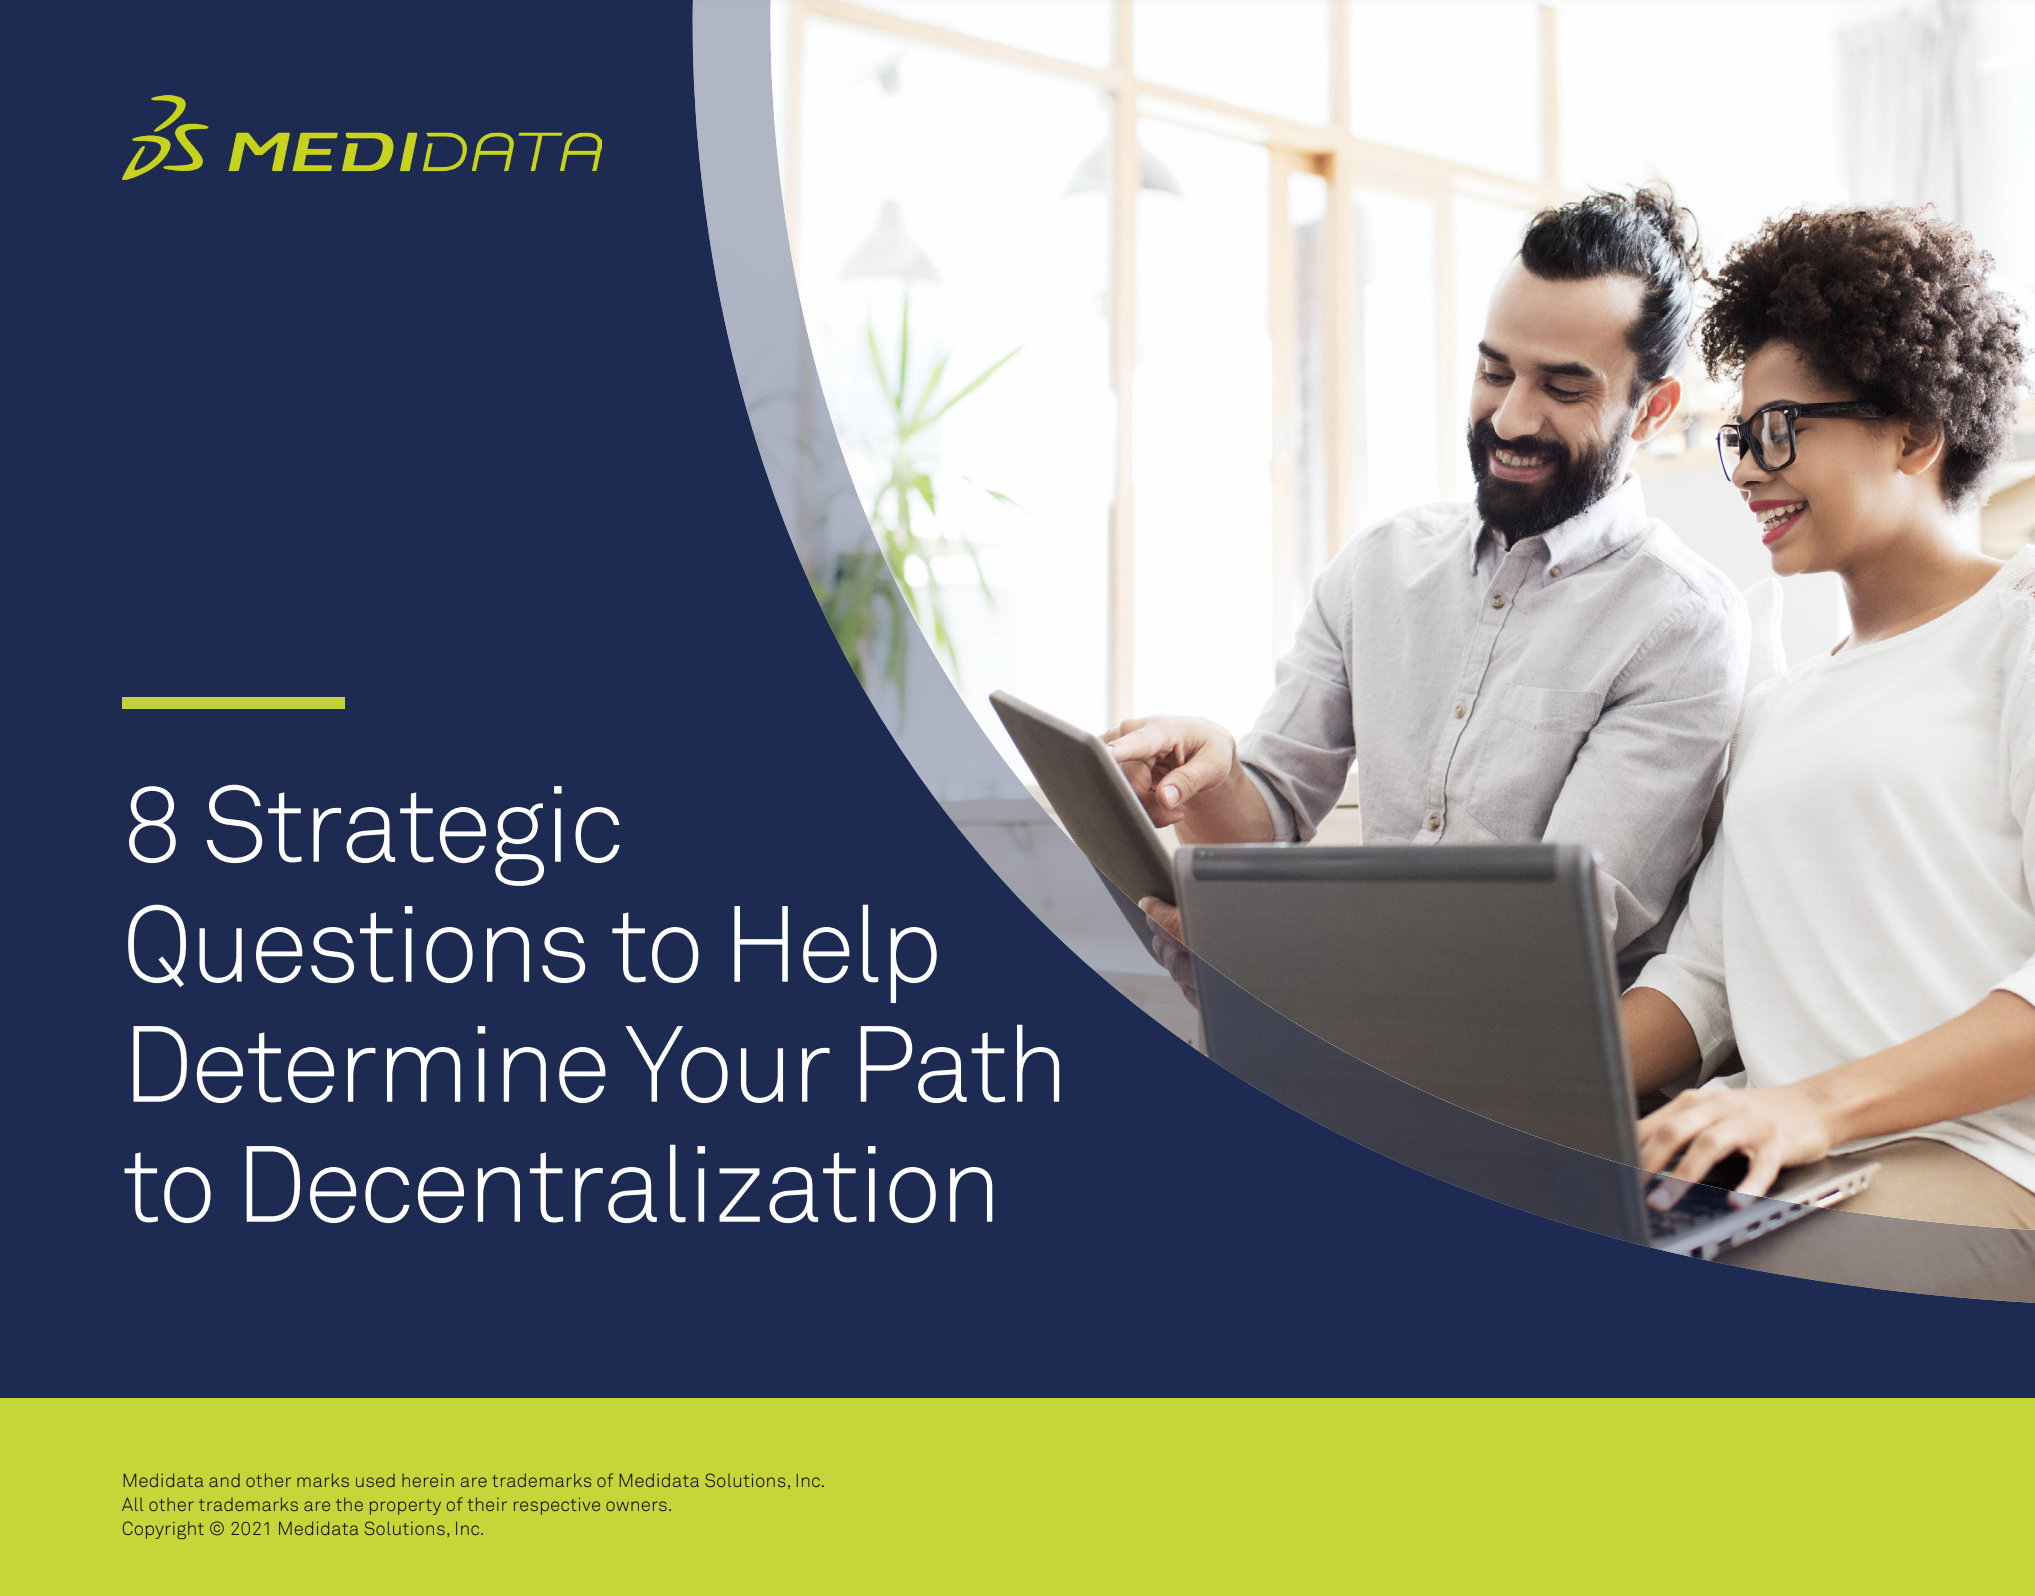 8 Strategic Questions to Help Determine Your Path to Decentralization